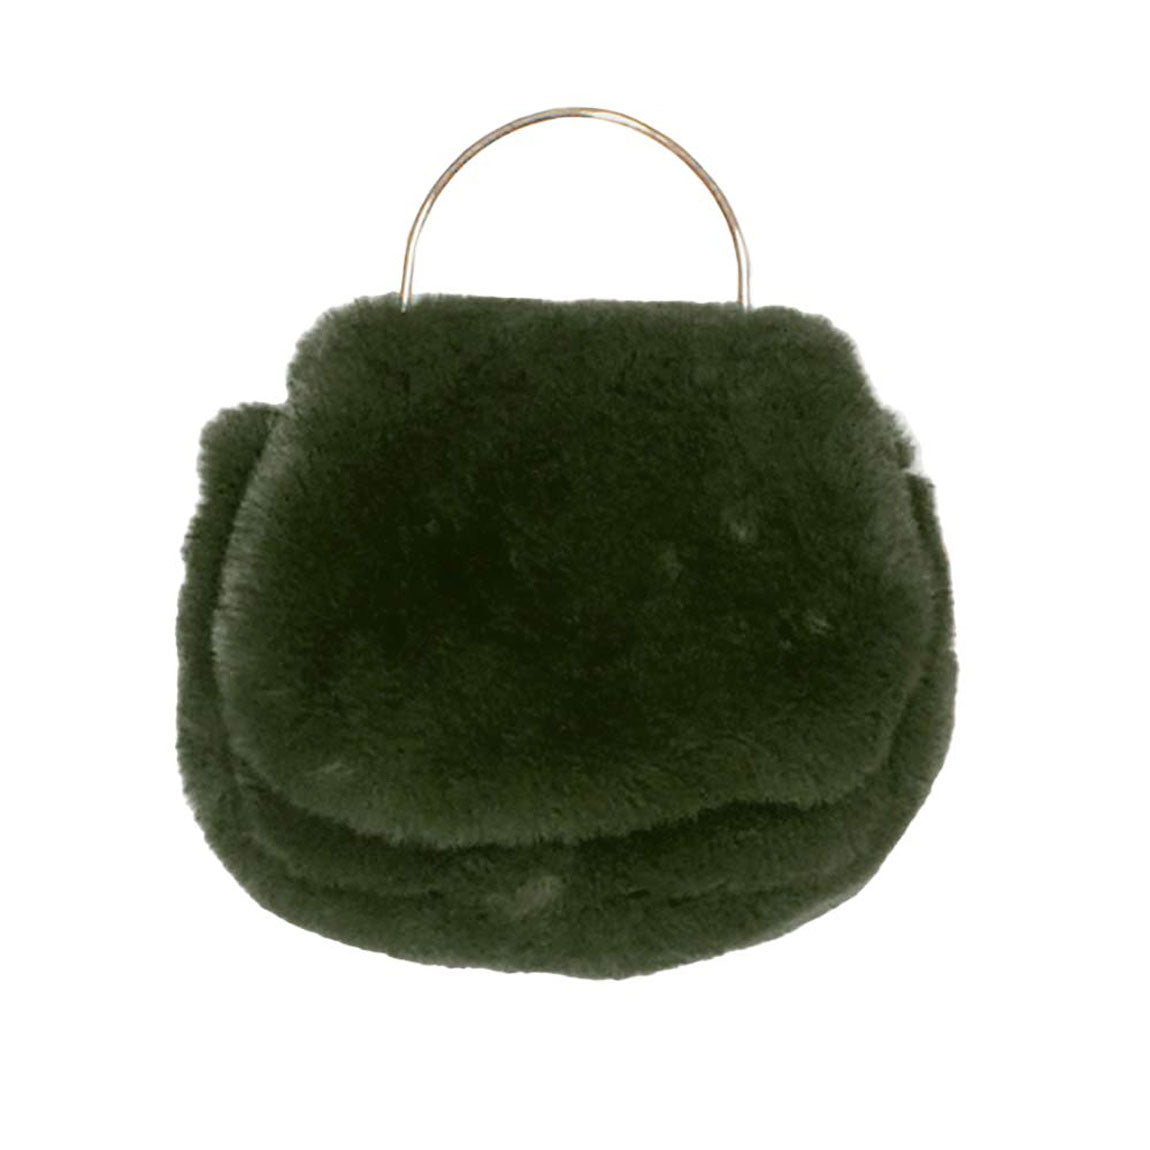 Olive Green Solid Faux Fur Tote Crossbody Bag. This high quality Tote Crossbody Bag is both unique and stylish. Suitable for money, credit cards, keys or coins and many more things, light and gorgeous. perfectly lightweight to carry around all day. Look like the ultimate fashionista carrying this trendy faux fur Tote Crossbody Bag! Perfect Birthday Gift, Anniversary Gift, Mother's Day Gift, Graduation Gift, Valentine's Day Gift.